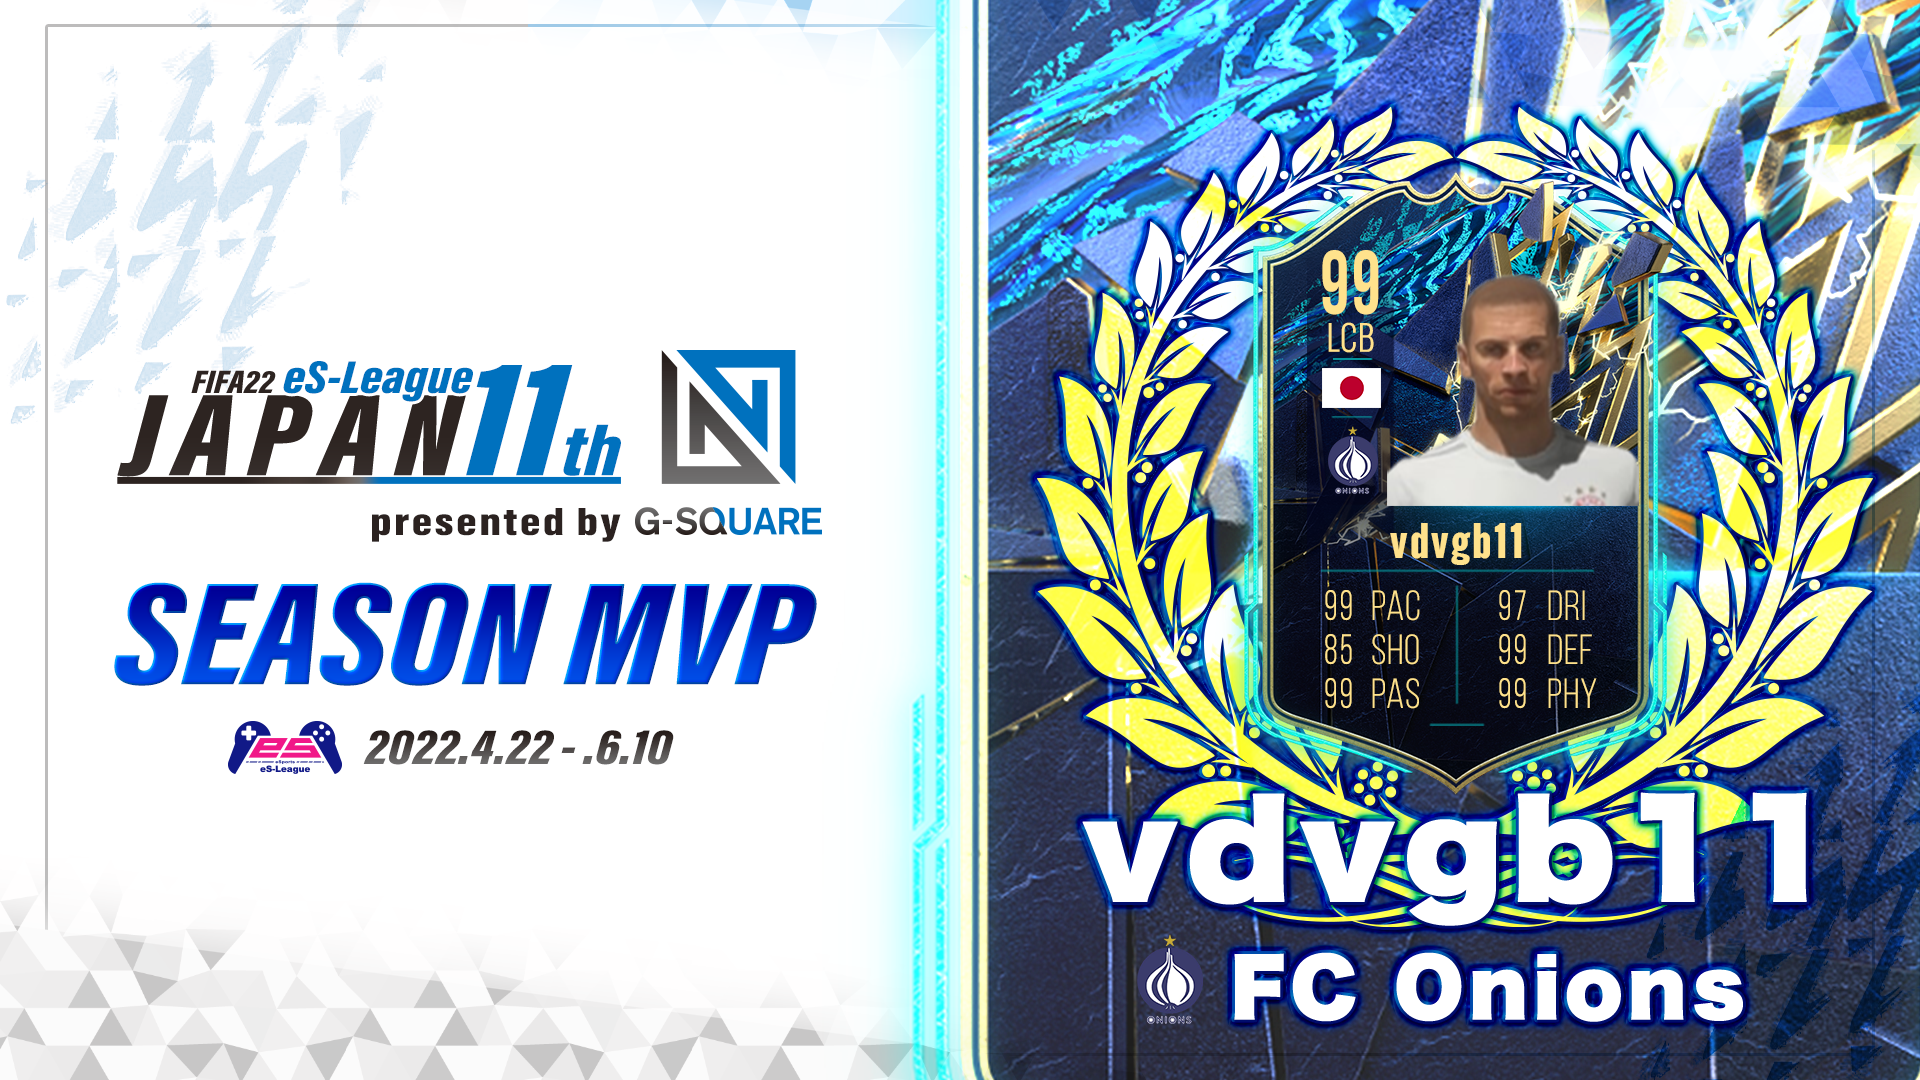 【MVP】FIFA22 eS-League JAPAN 11th presented by G-SQUARE